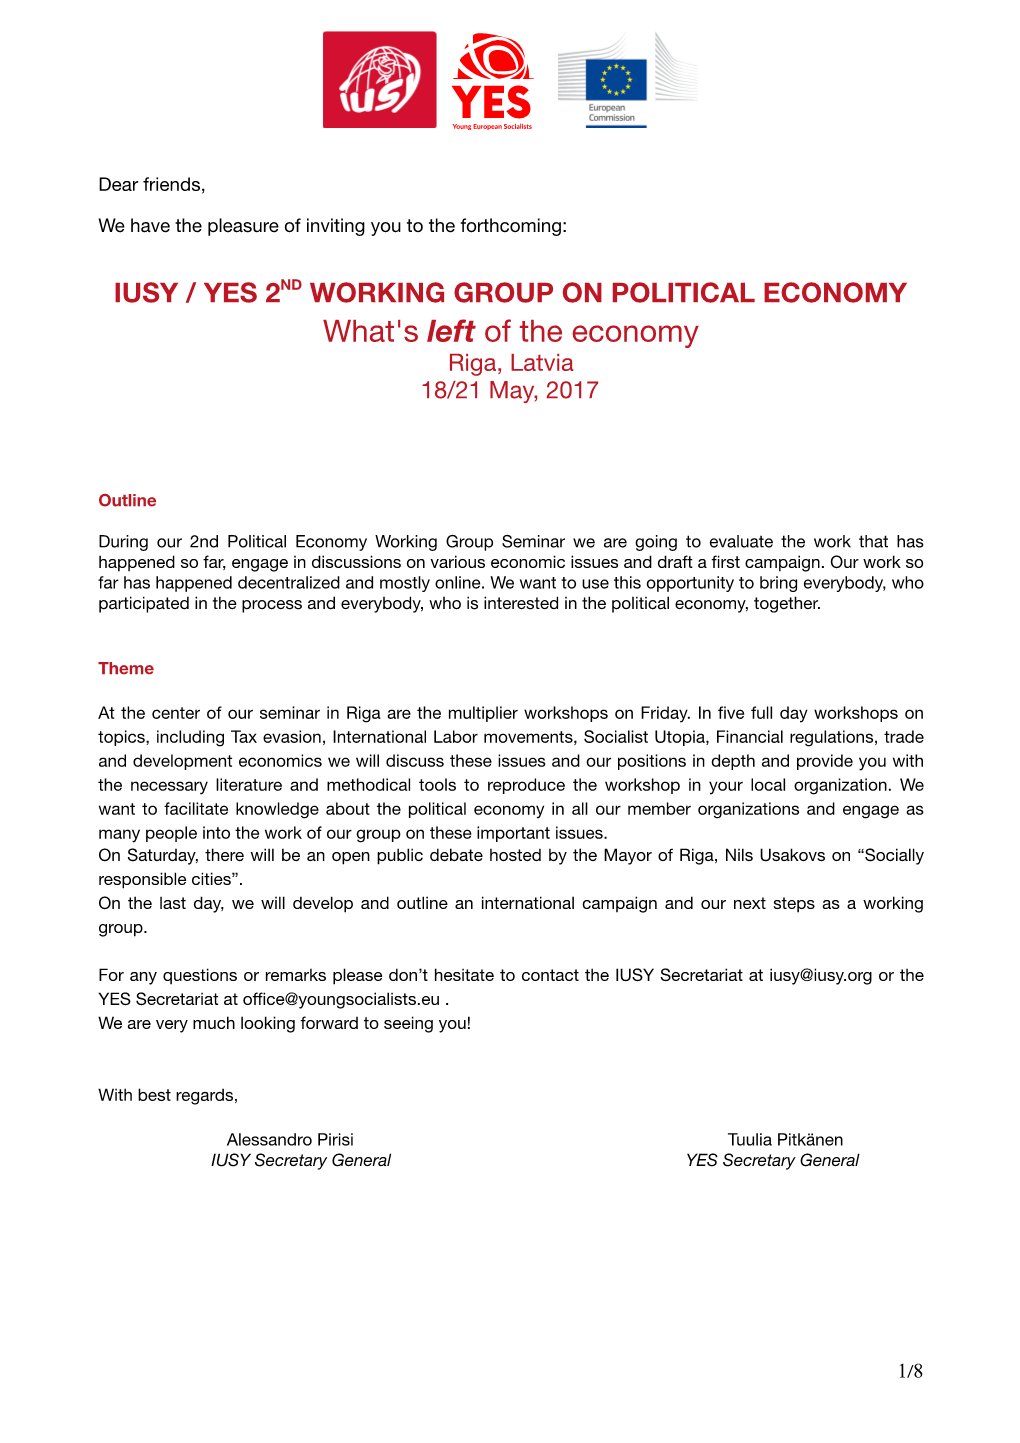 IUSY / YES 2ND WORKING GROUP on POLITICAL ECONOMY What's Left of the Economy Riga, Latvia 18/21 May, 2017